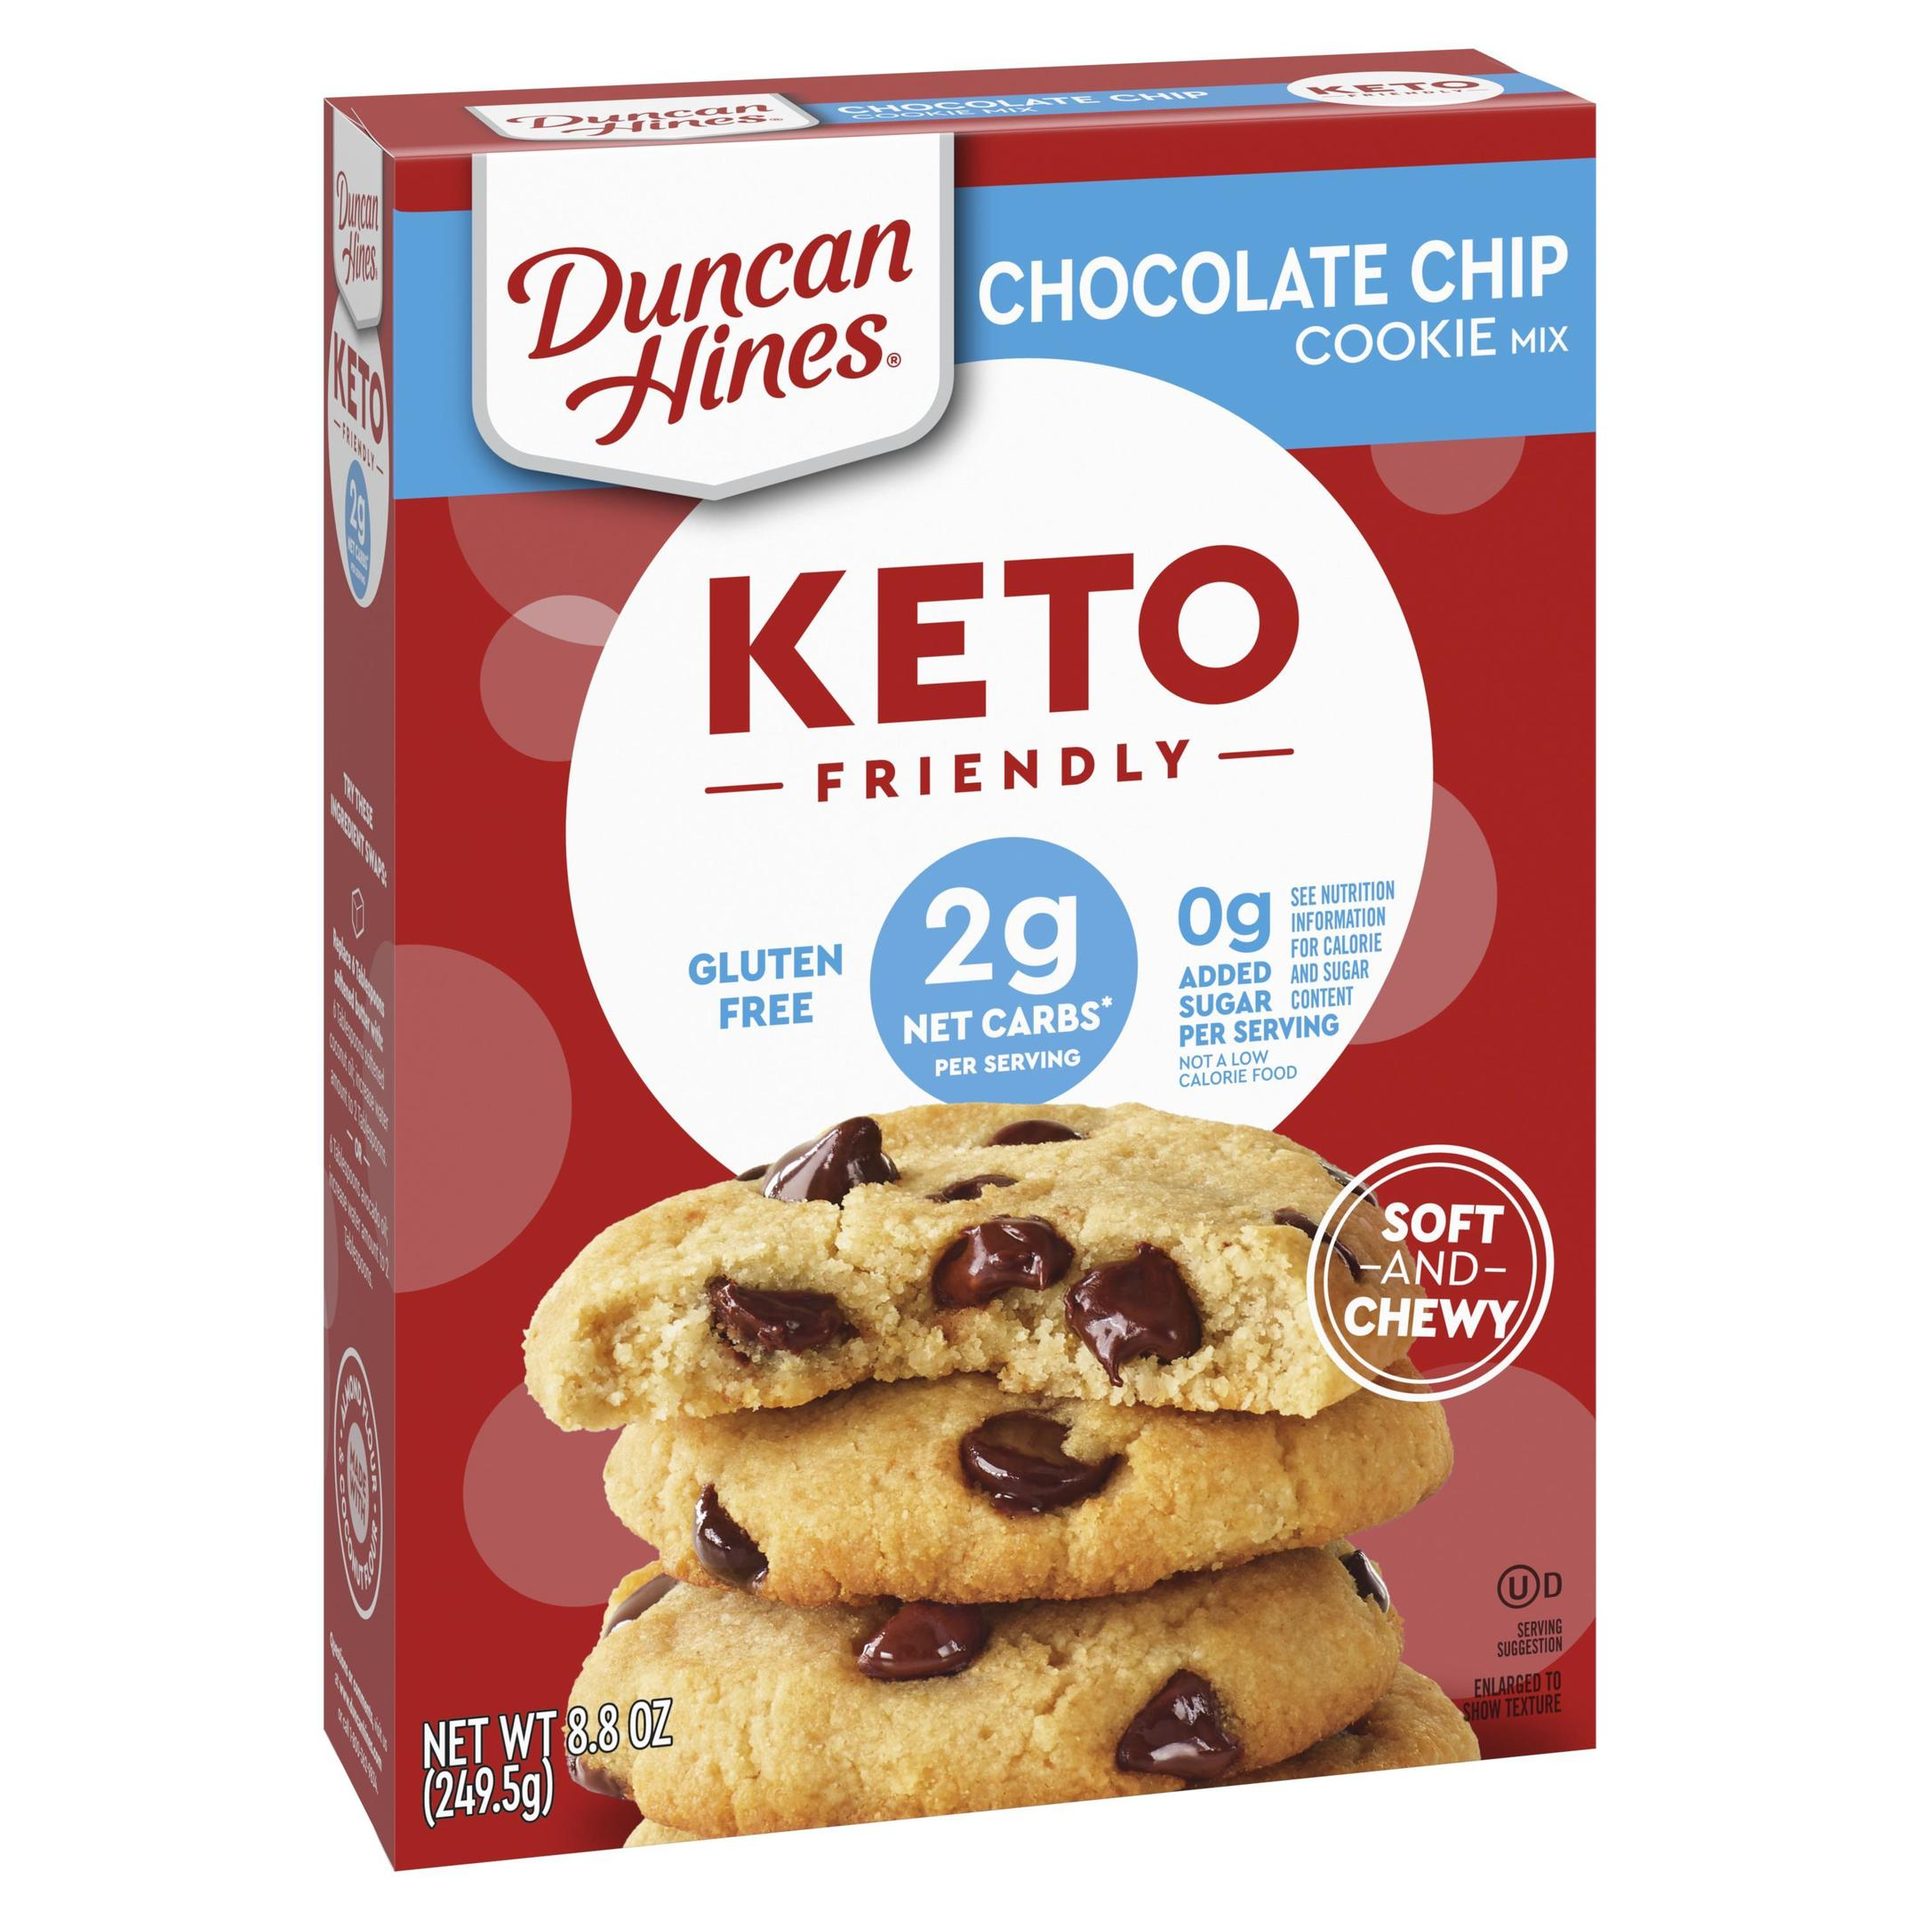 Chocolate chip cookie mix, Red box, Product, Chocolate chip cookies